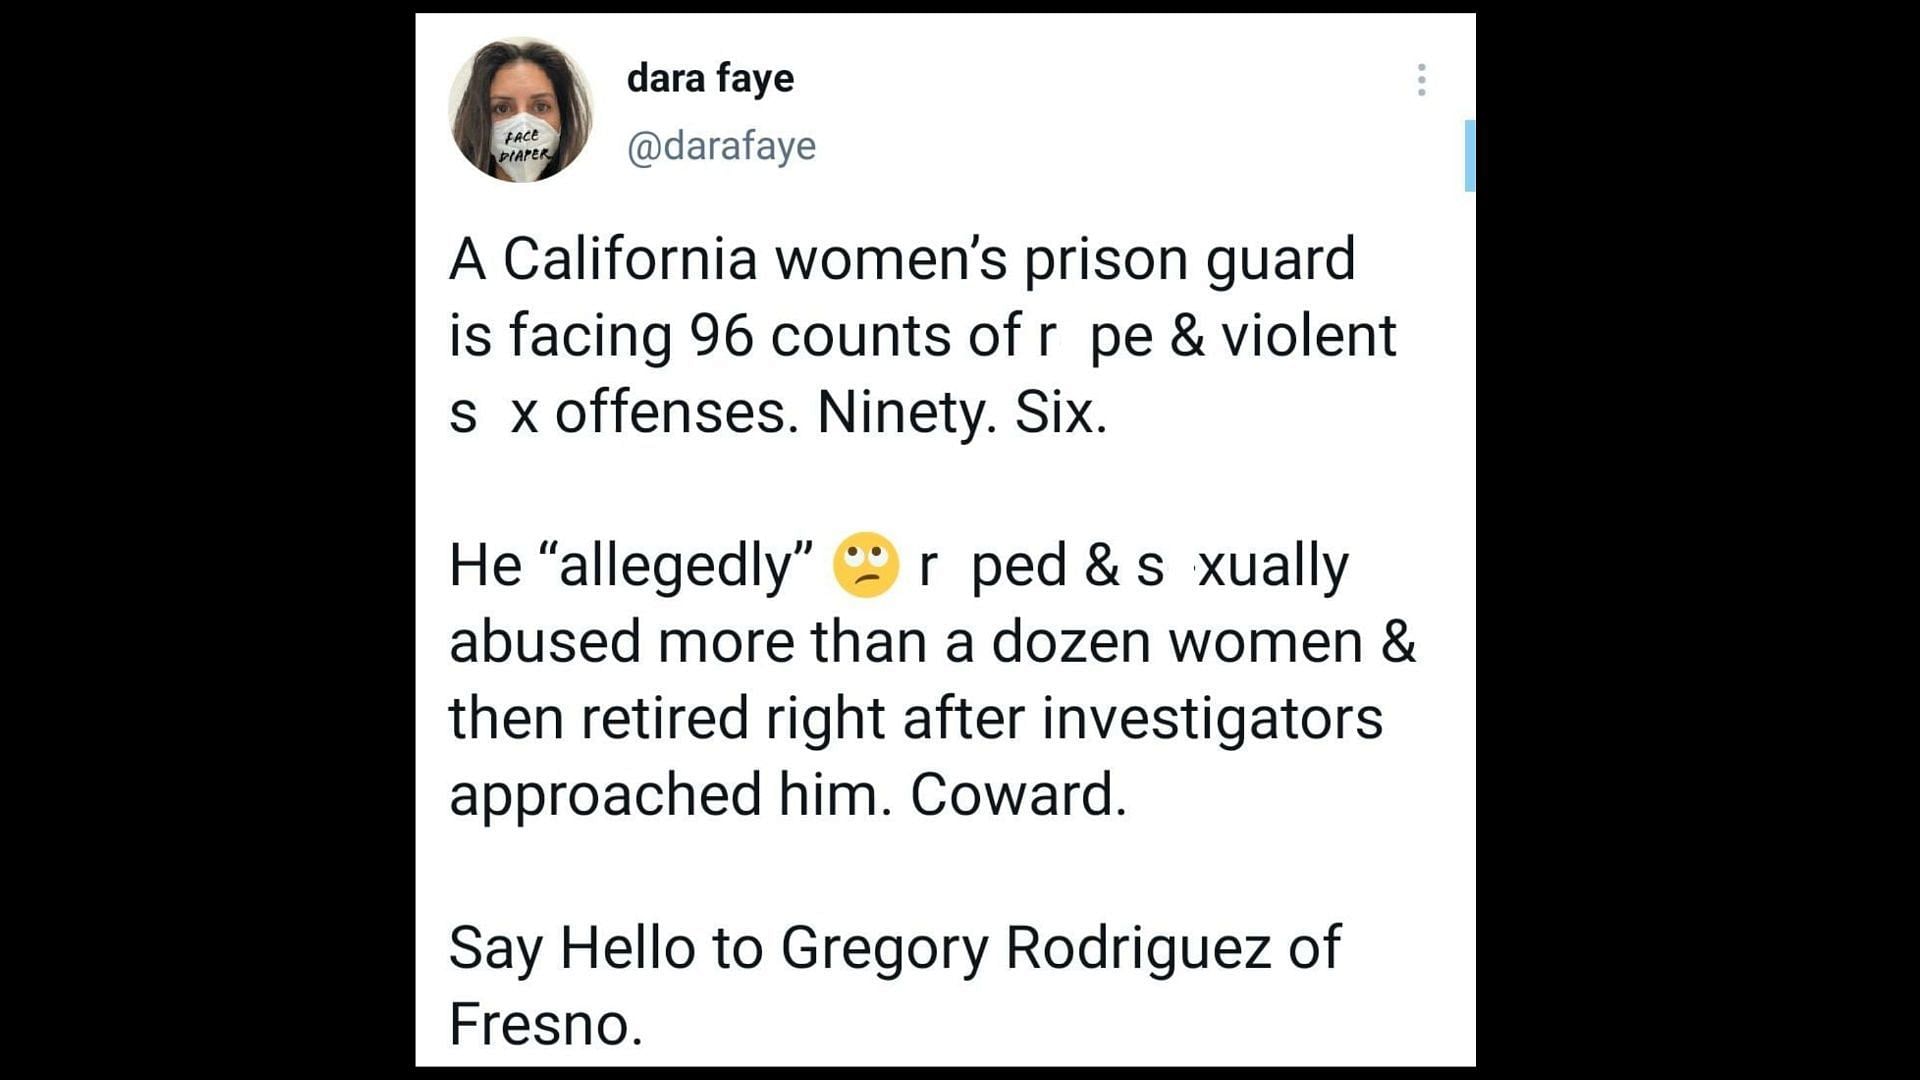 Rodriguez has been charged with around 96 counts, (Image via dara faye/Twitter)